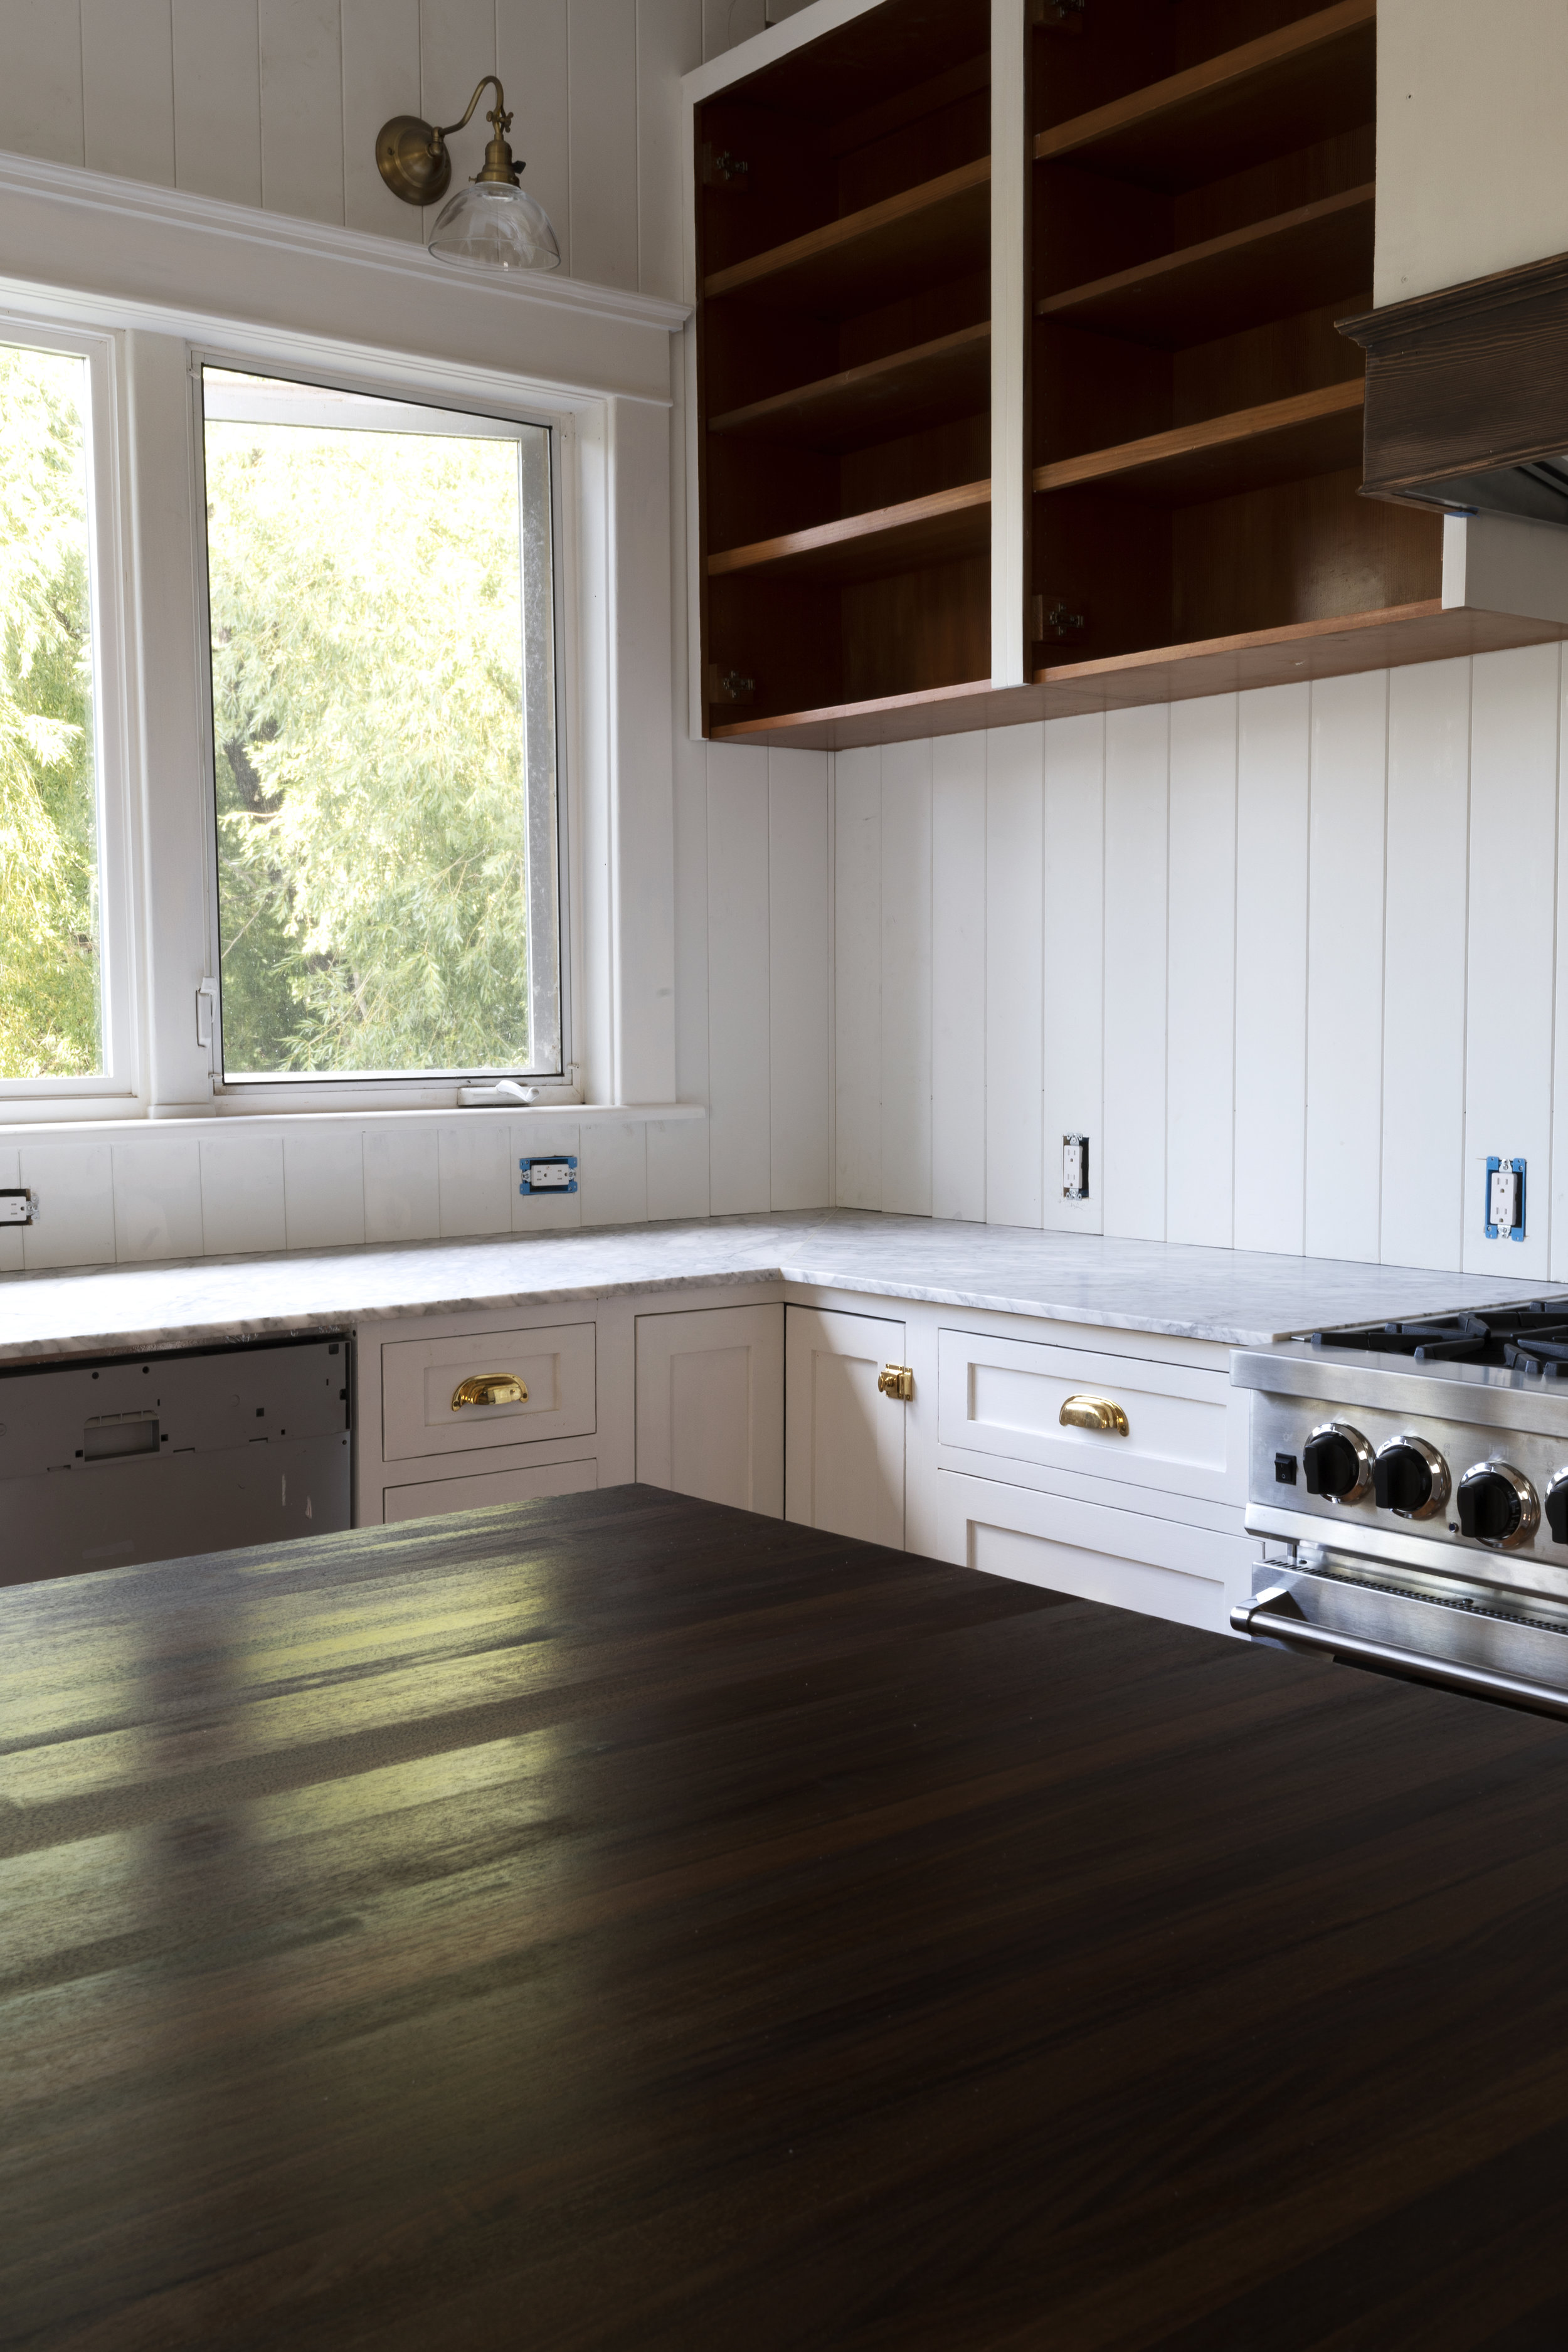 Butcher Block Countertop, Do You Have To Finish Butcher Block Countertops